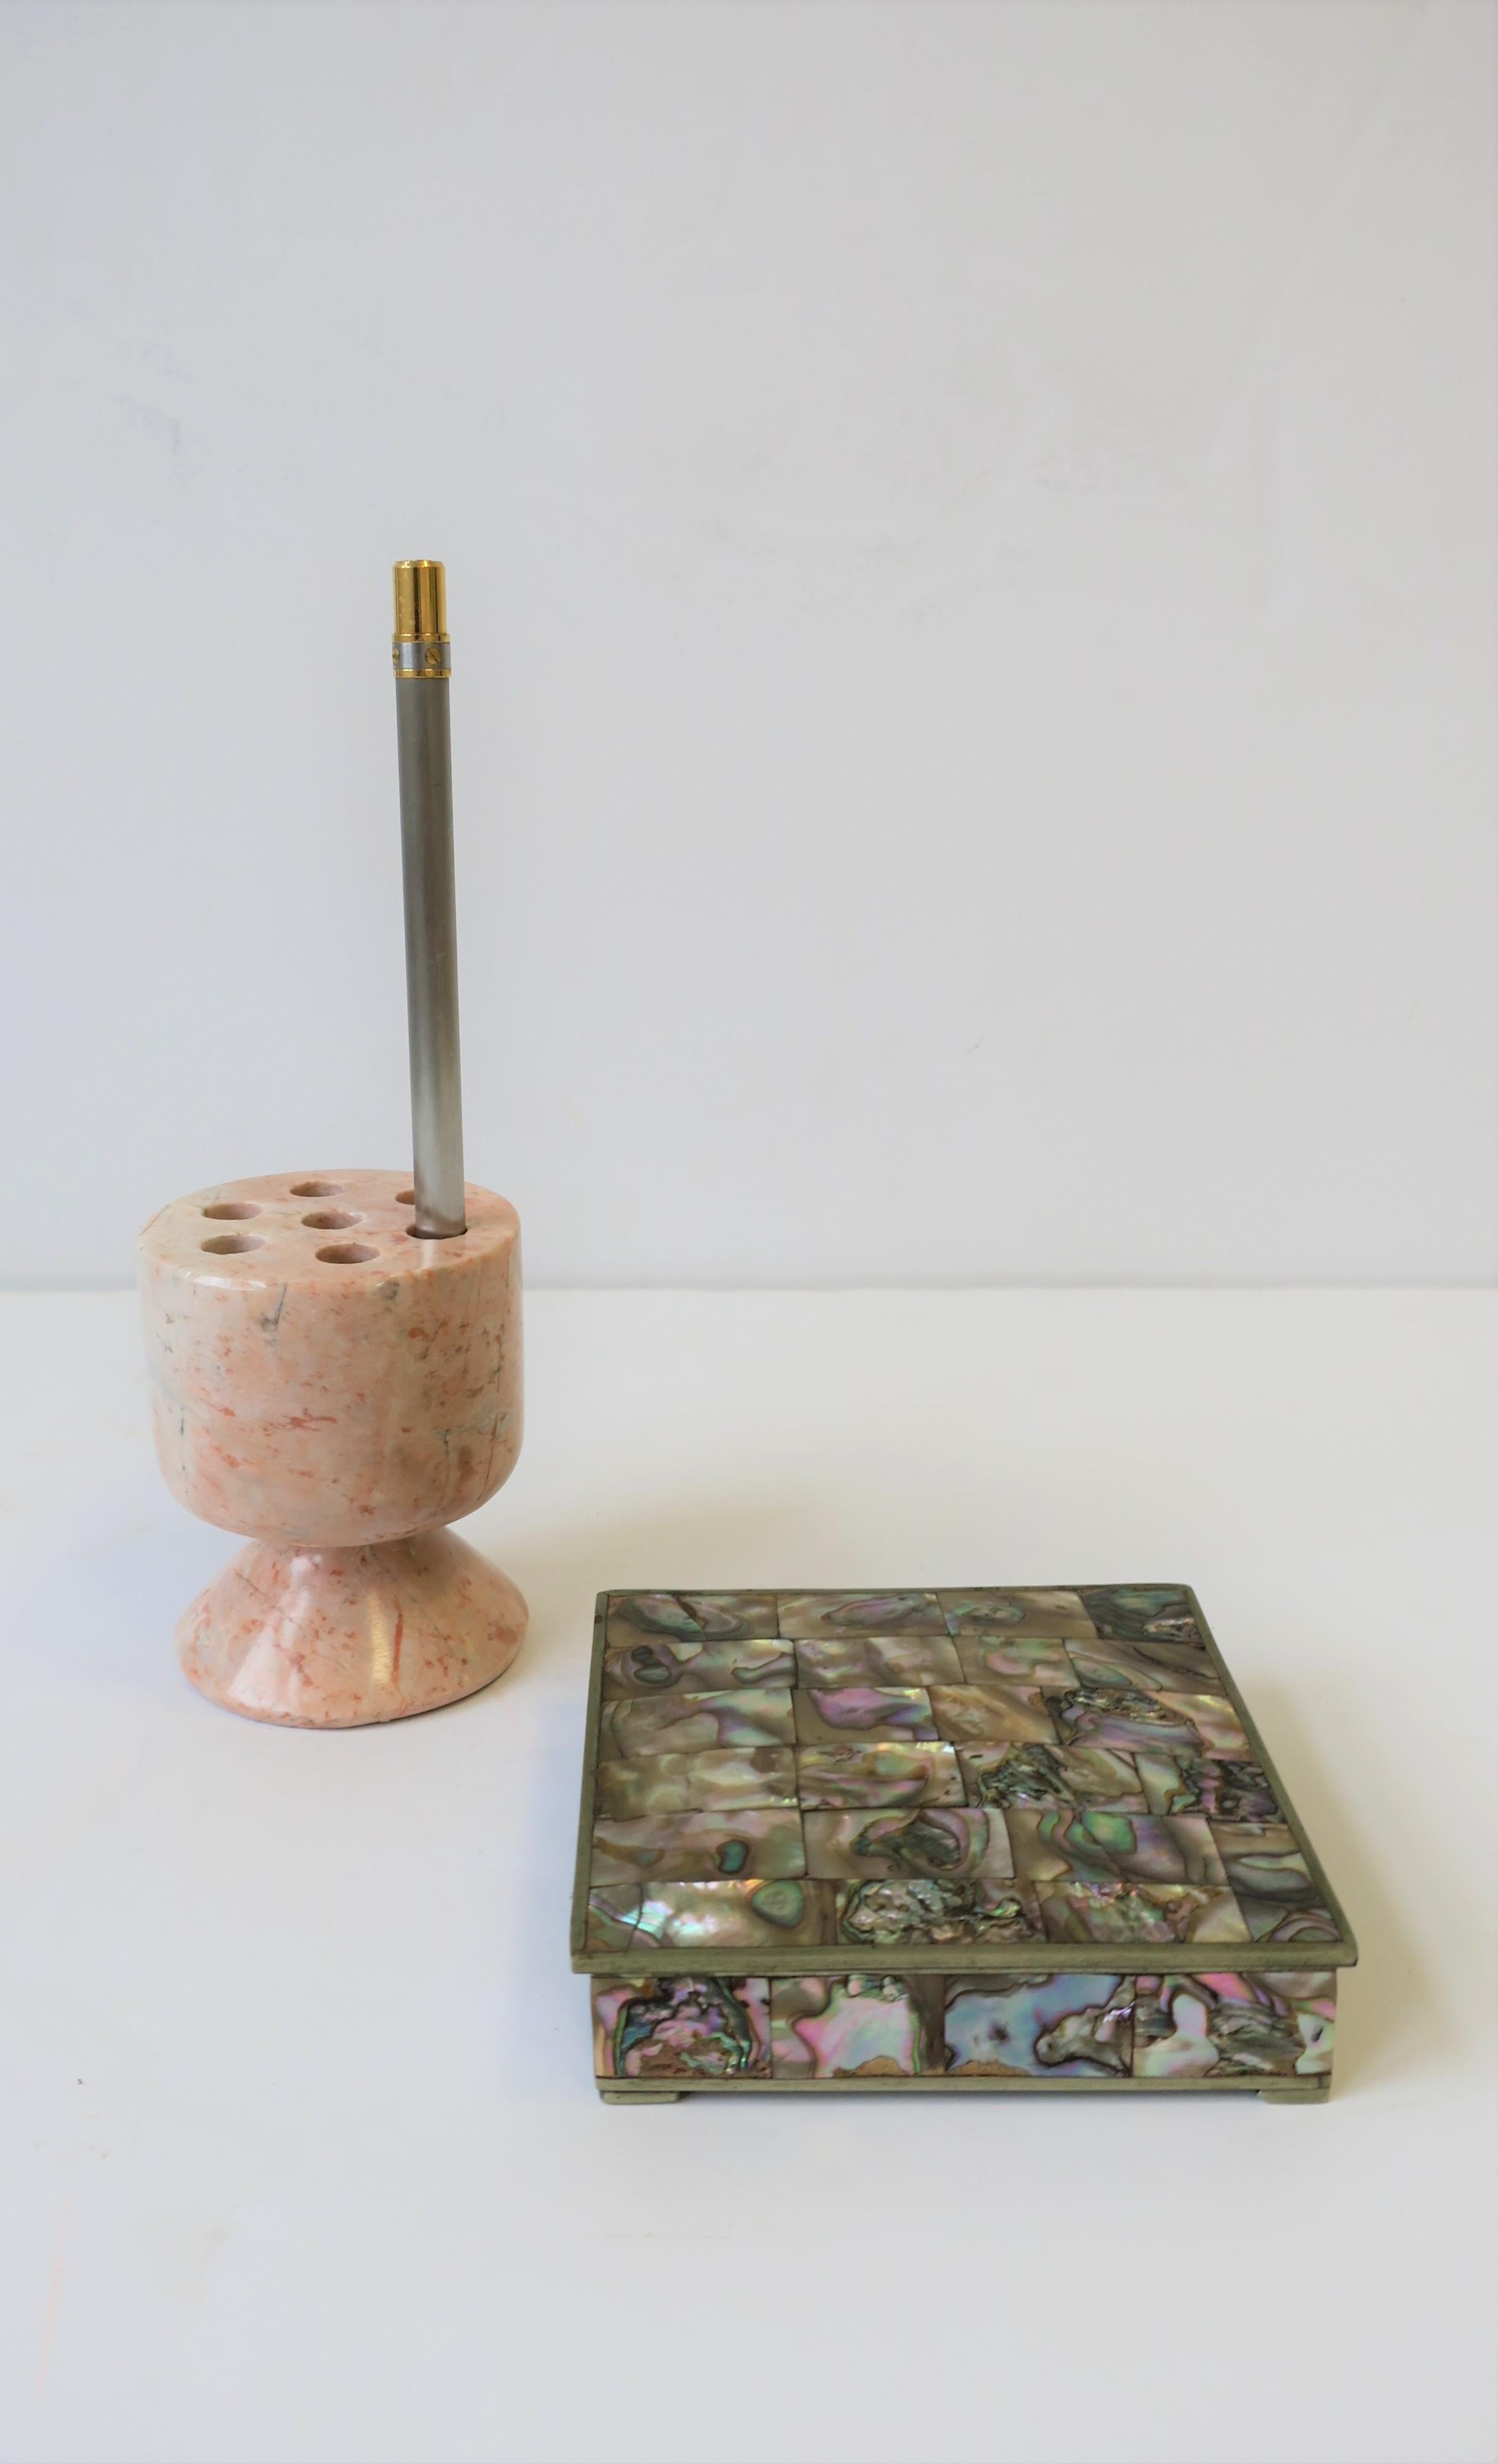 marble pencil holder